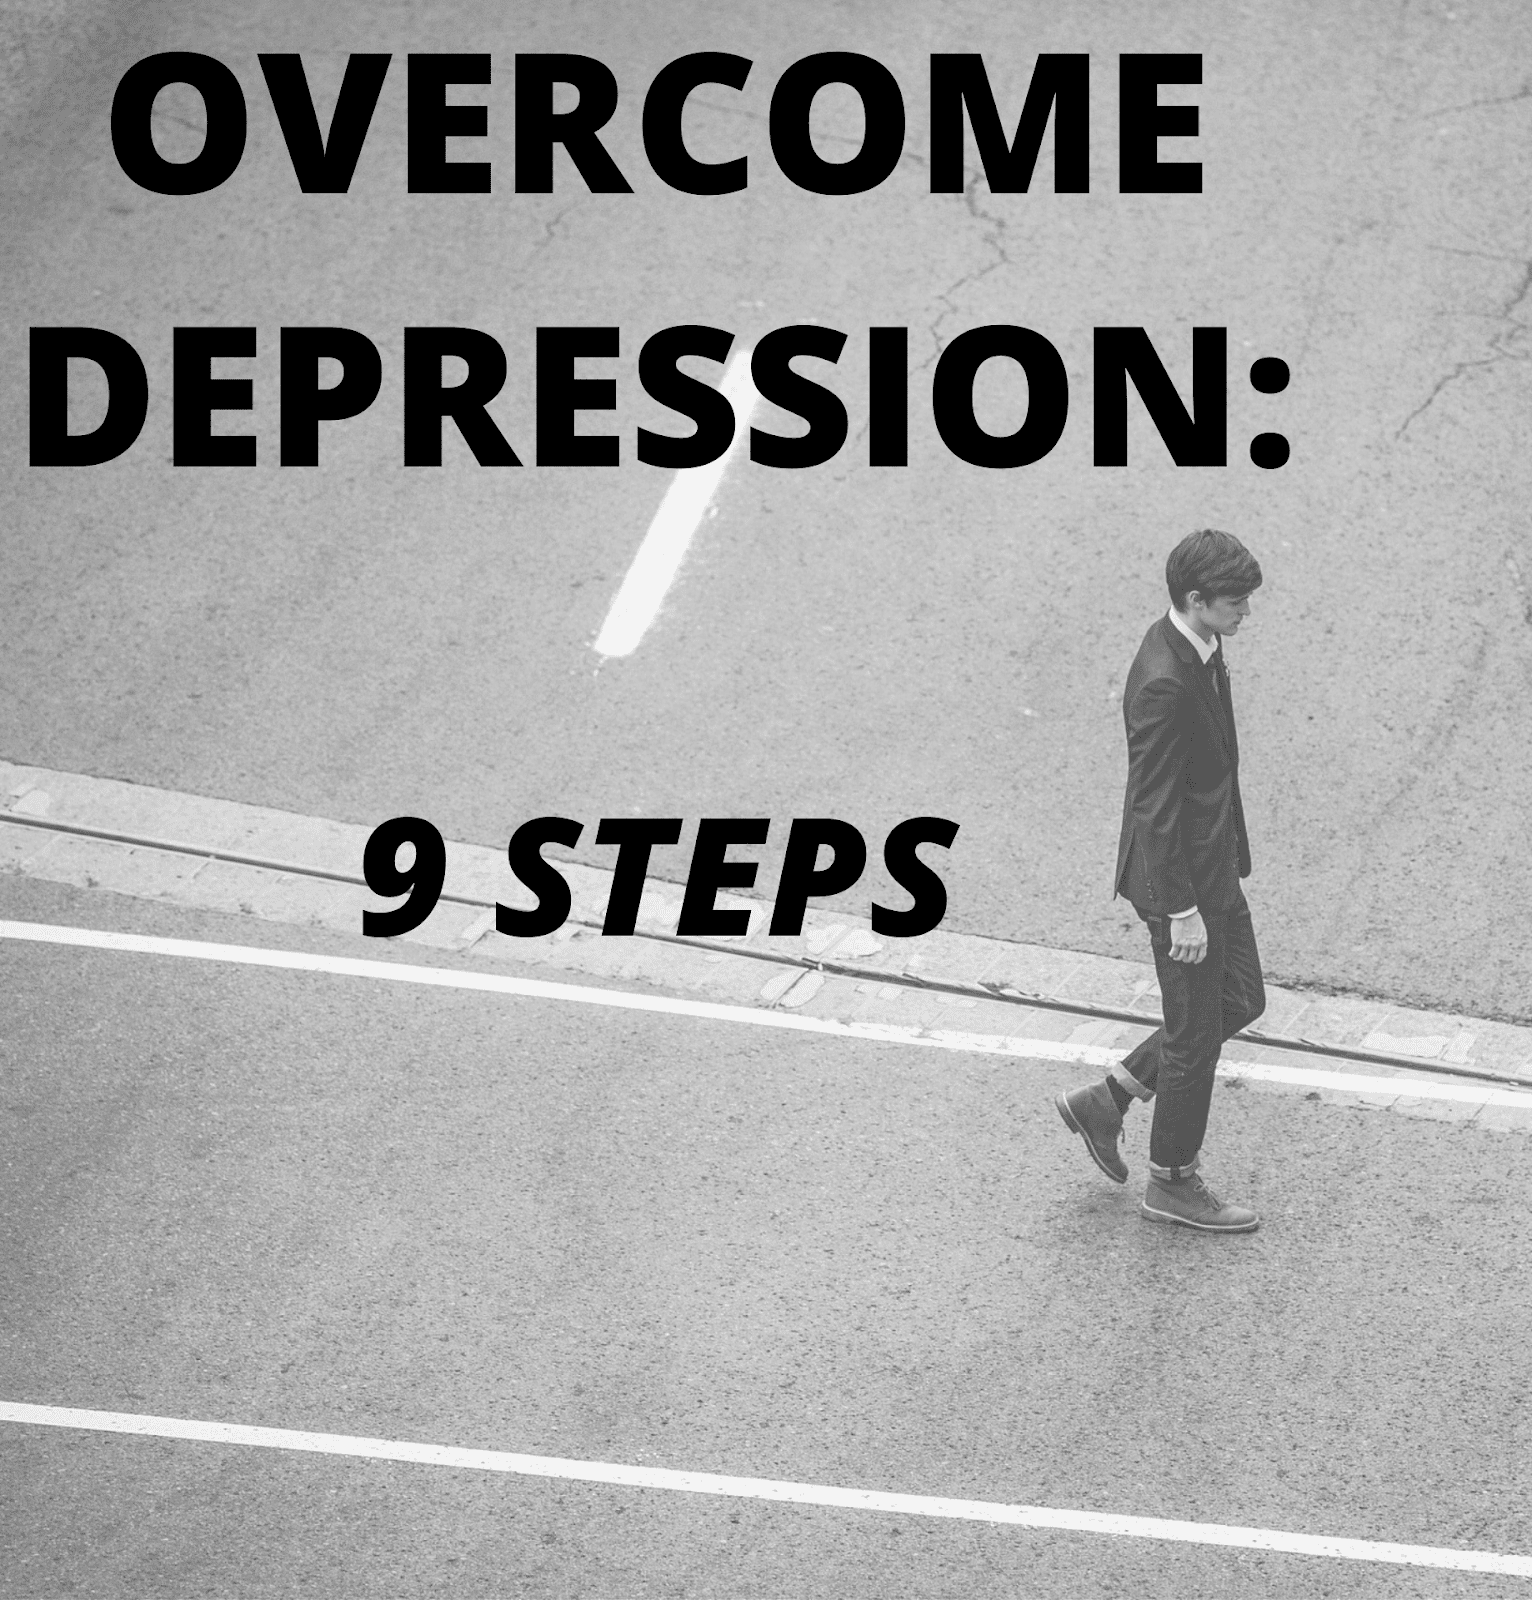 MAPHealth: How to Overcome Depression